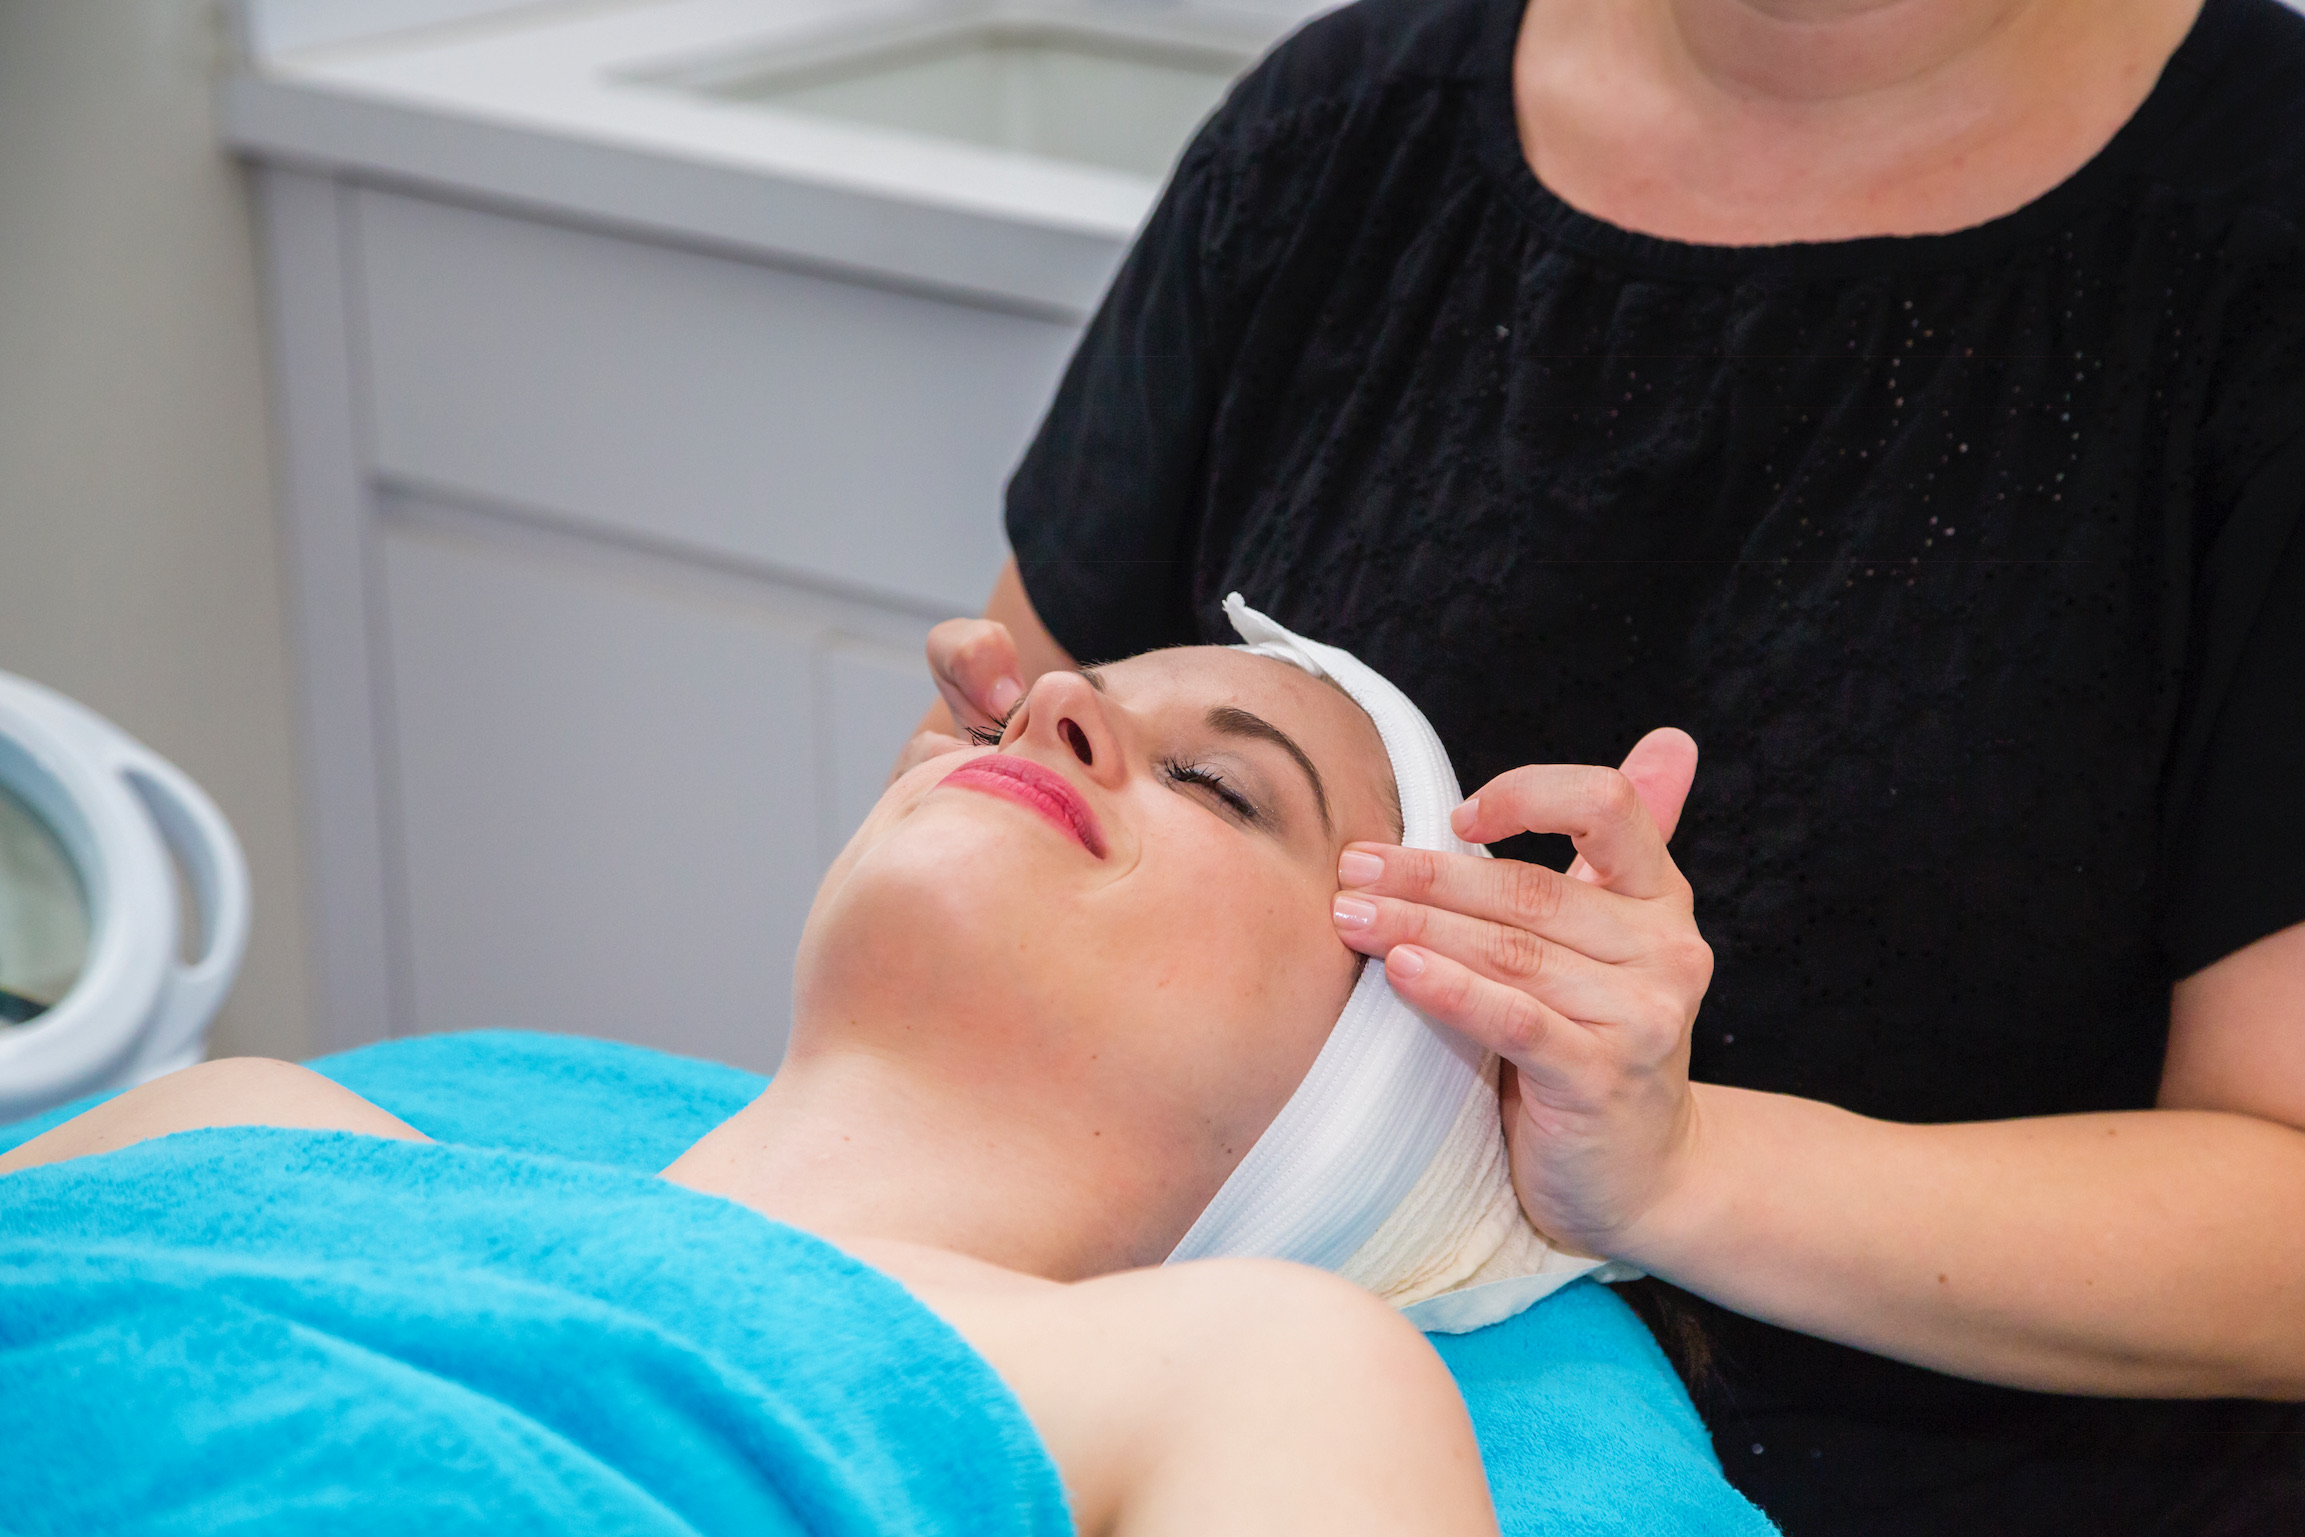 Woman laying down getting a facial: she has on pink lipstick and is covered by a blue blanket